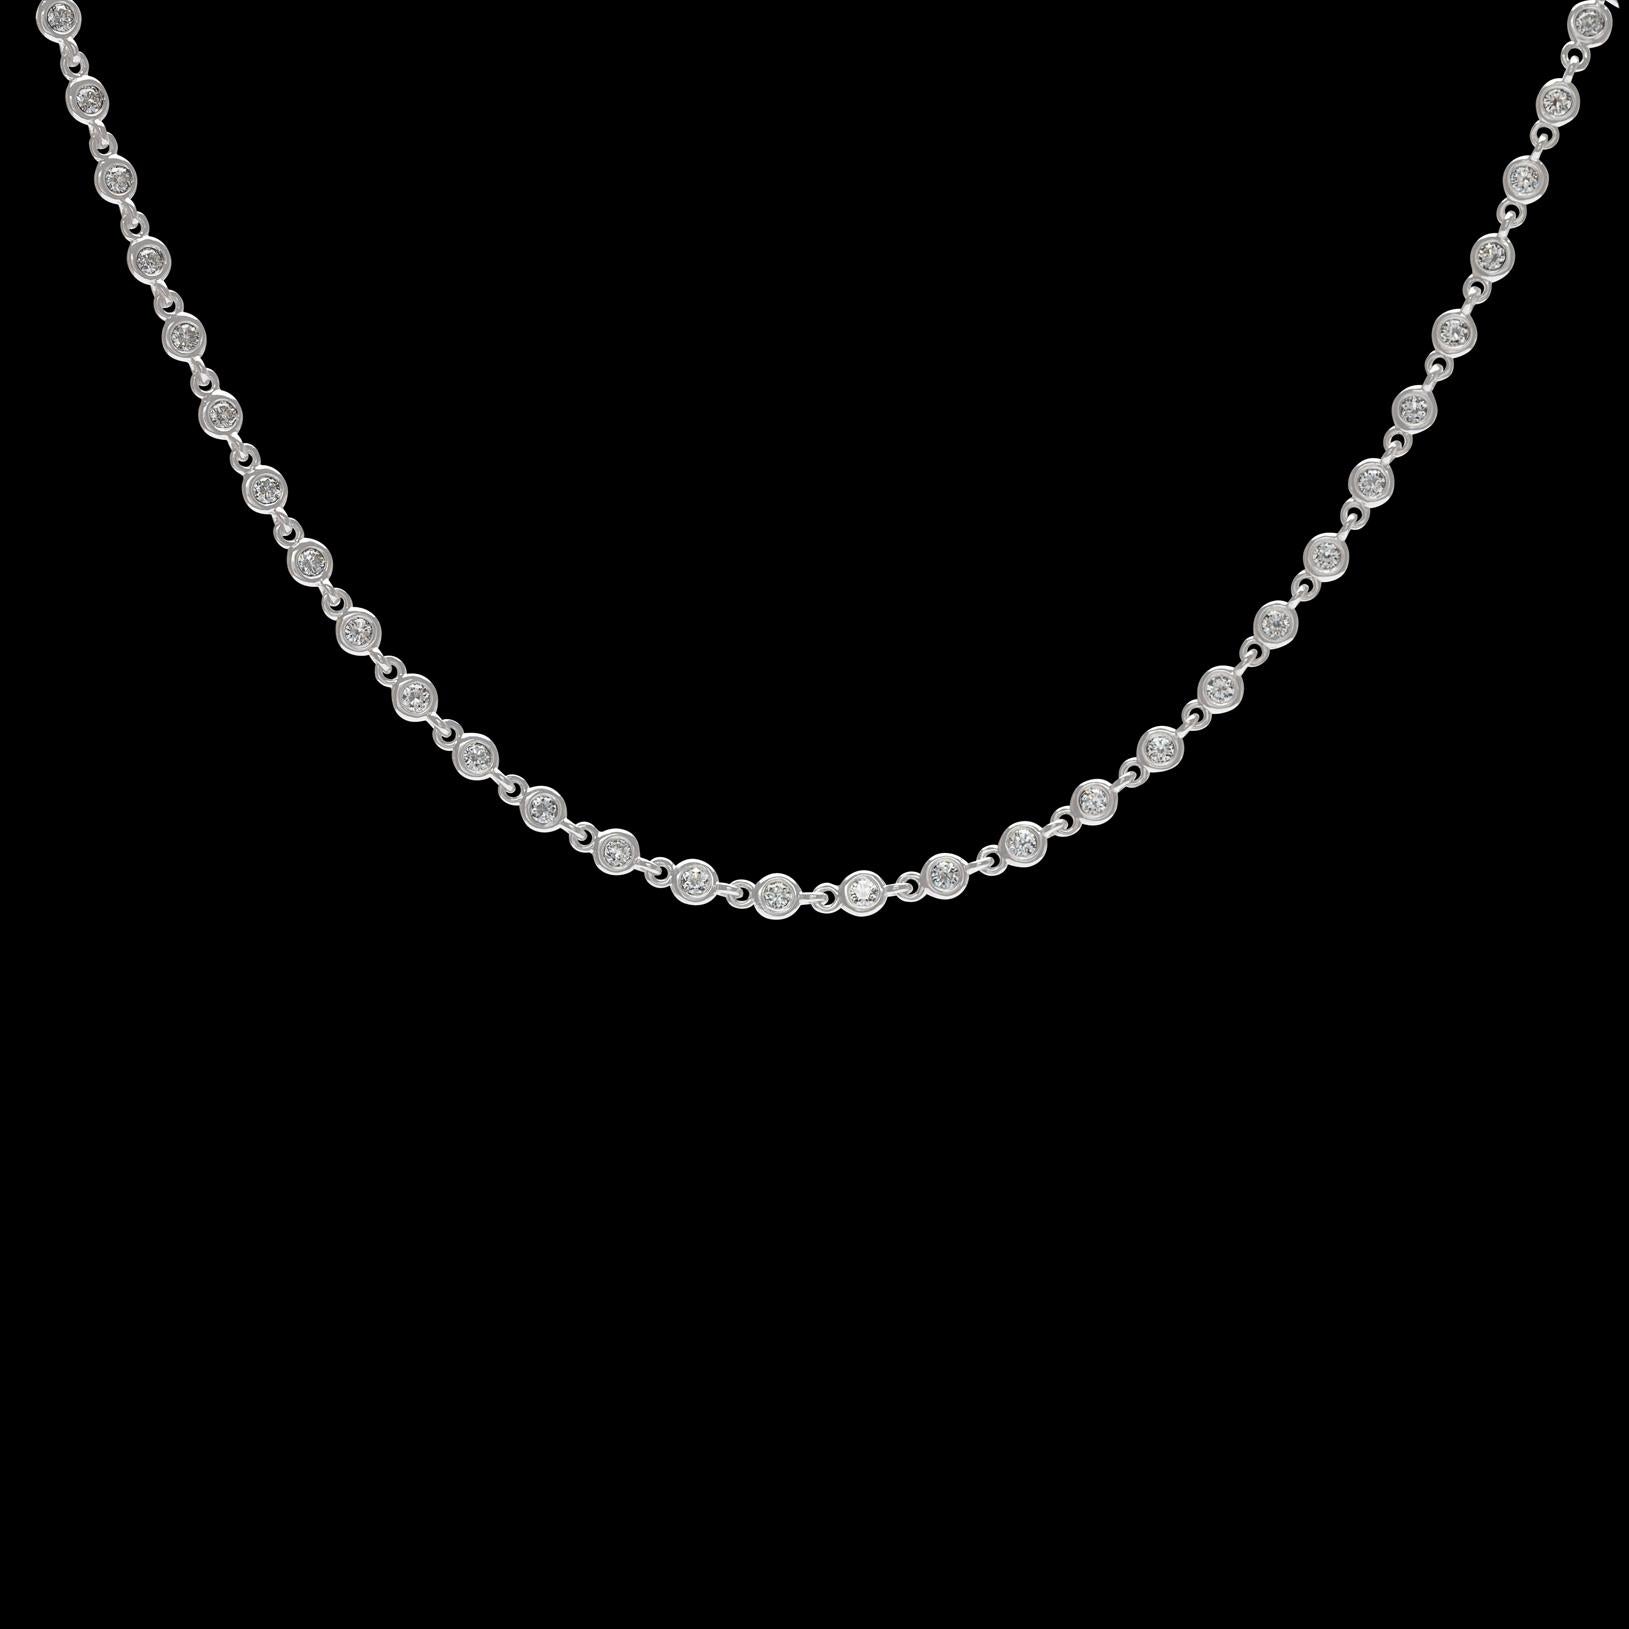 Women's Diamond and White Gold Necklace